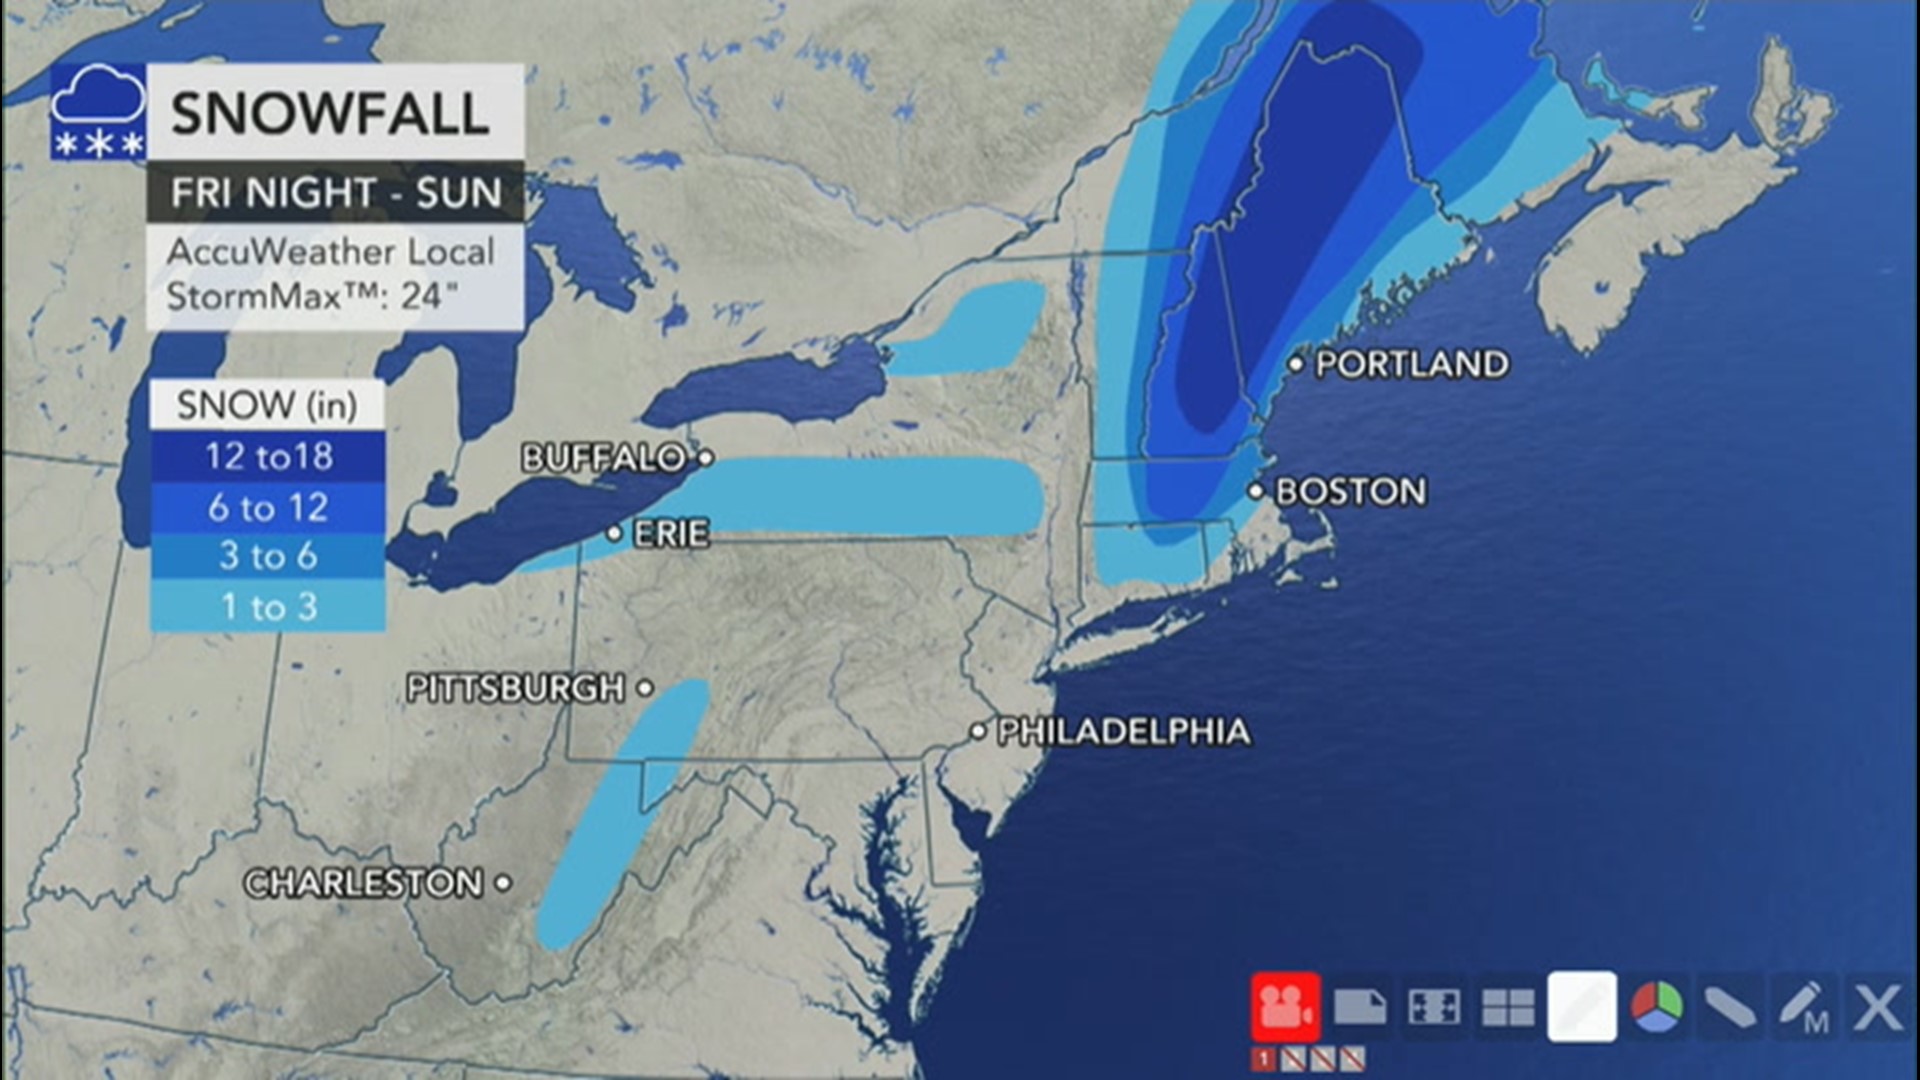 New England is set to be blasted with its first blizzard of the season. Snow totals could reach 12-18 inches in some places.